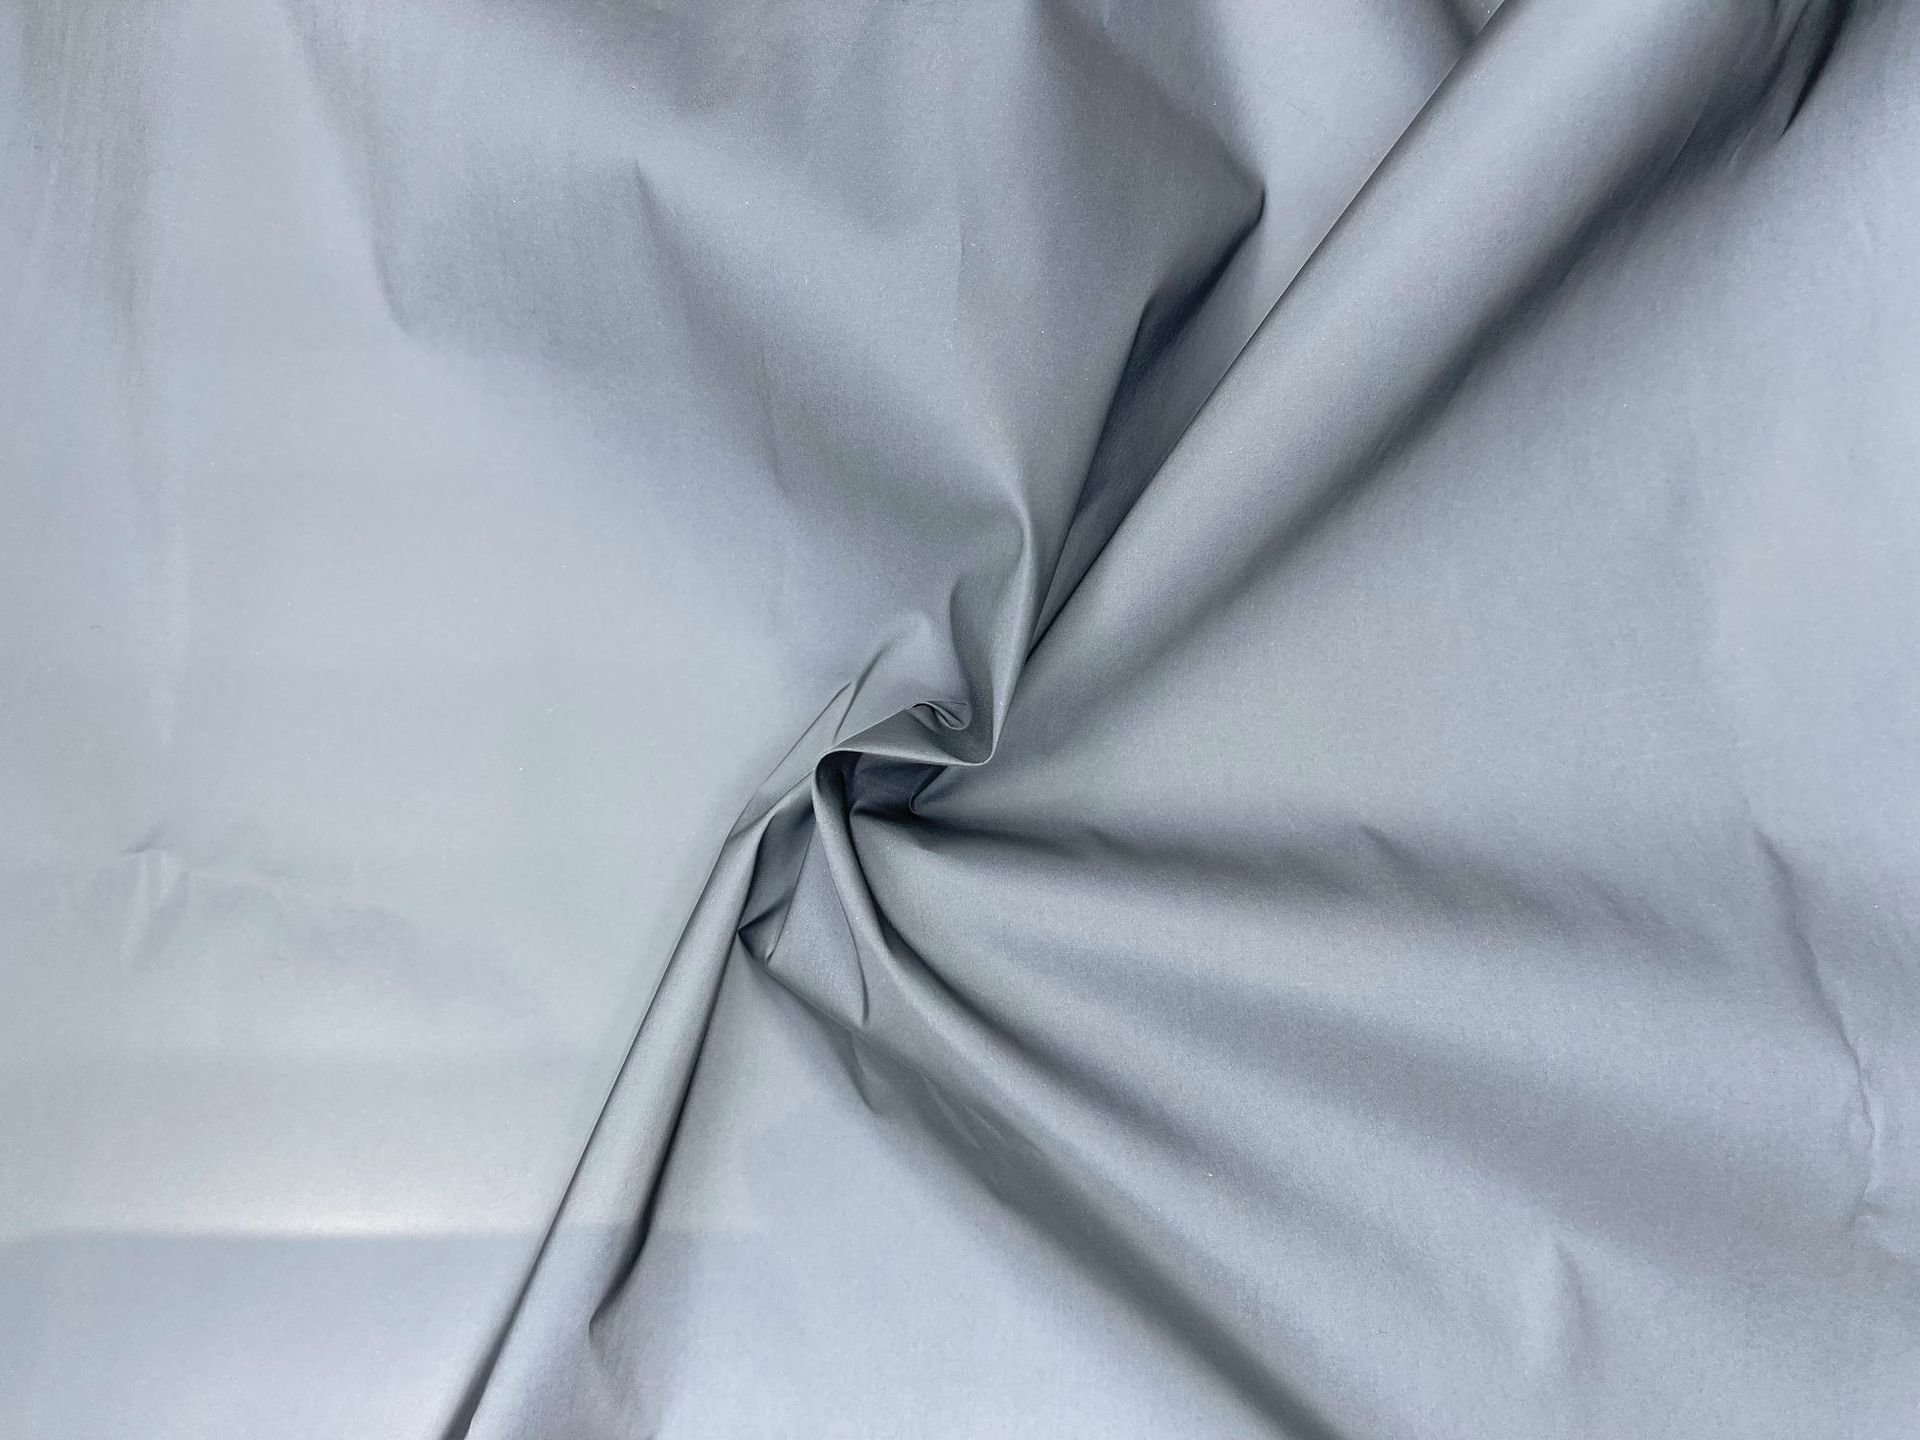 210T Reflective Windbreaker Fabric Reflective Cloth Factory in Stock Supply Luminous Clothing Cotton-Padded down Reflective Fabric